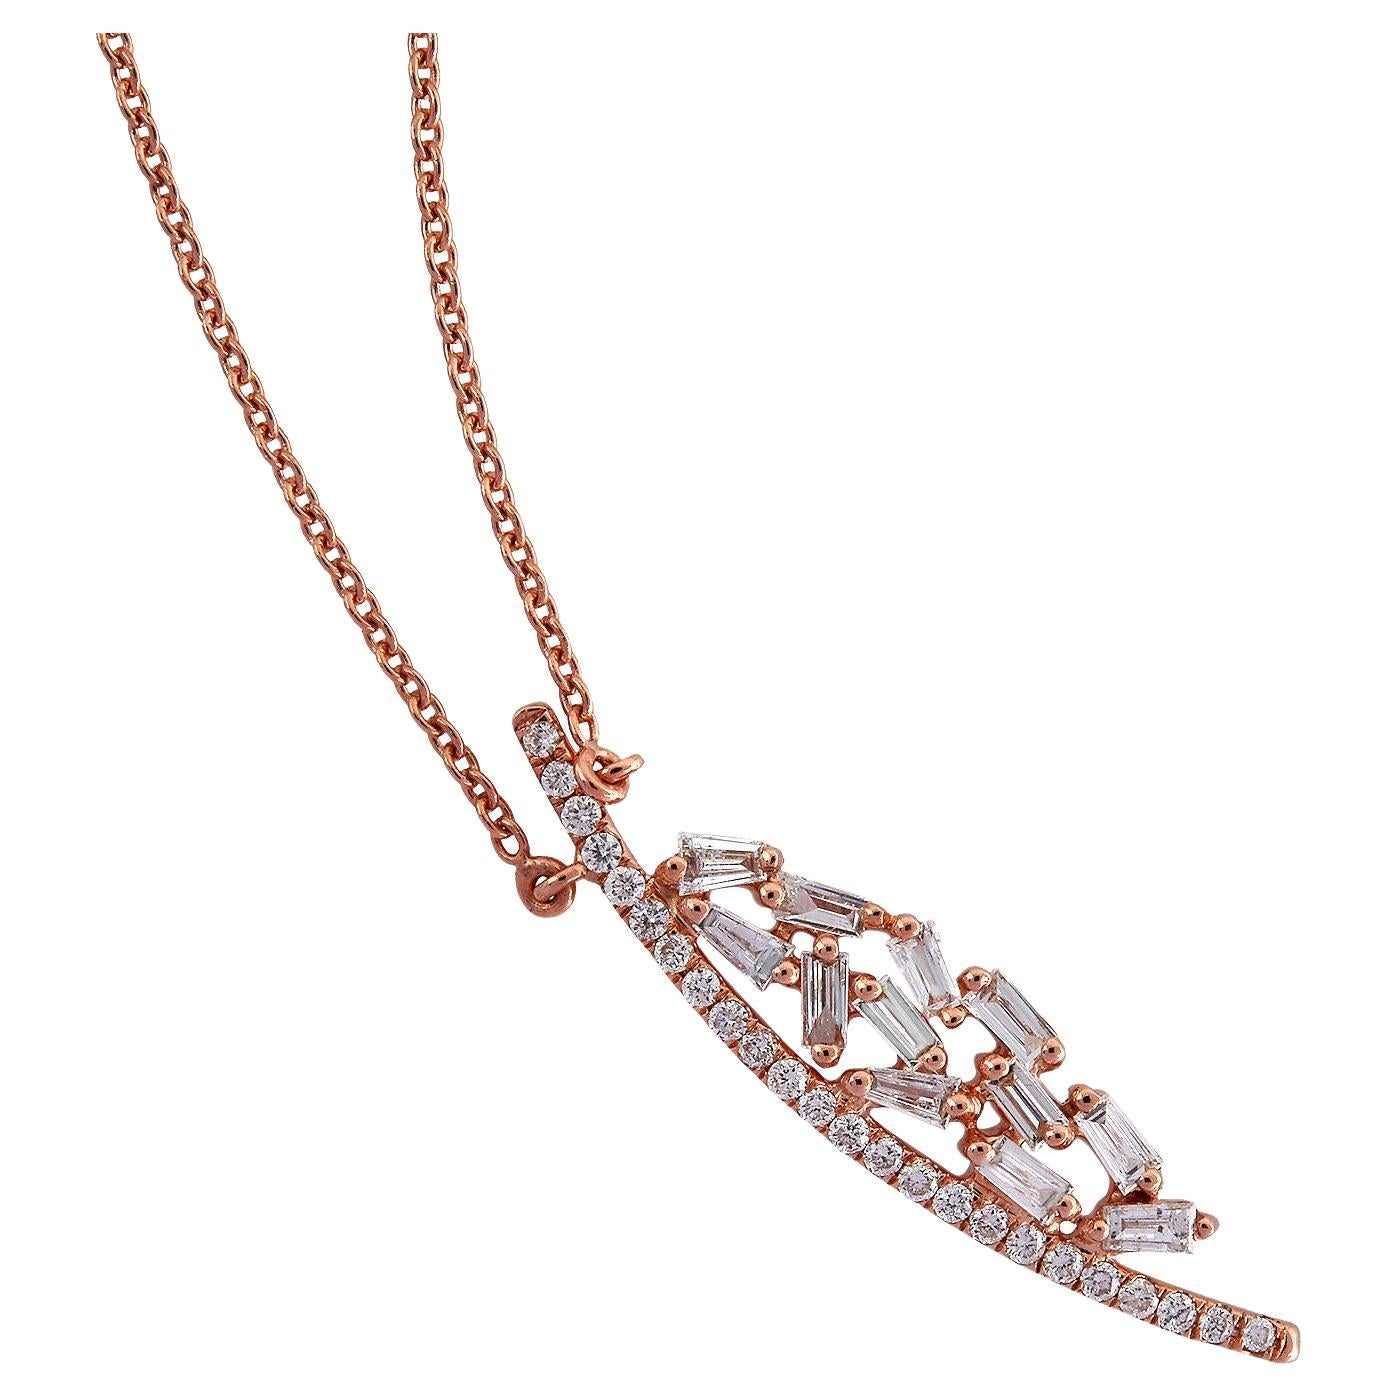 Designer Choker Necklace with Baguette Diamonds Charm Made in 18k Rose Gold For Sale